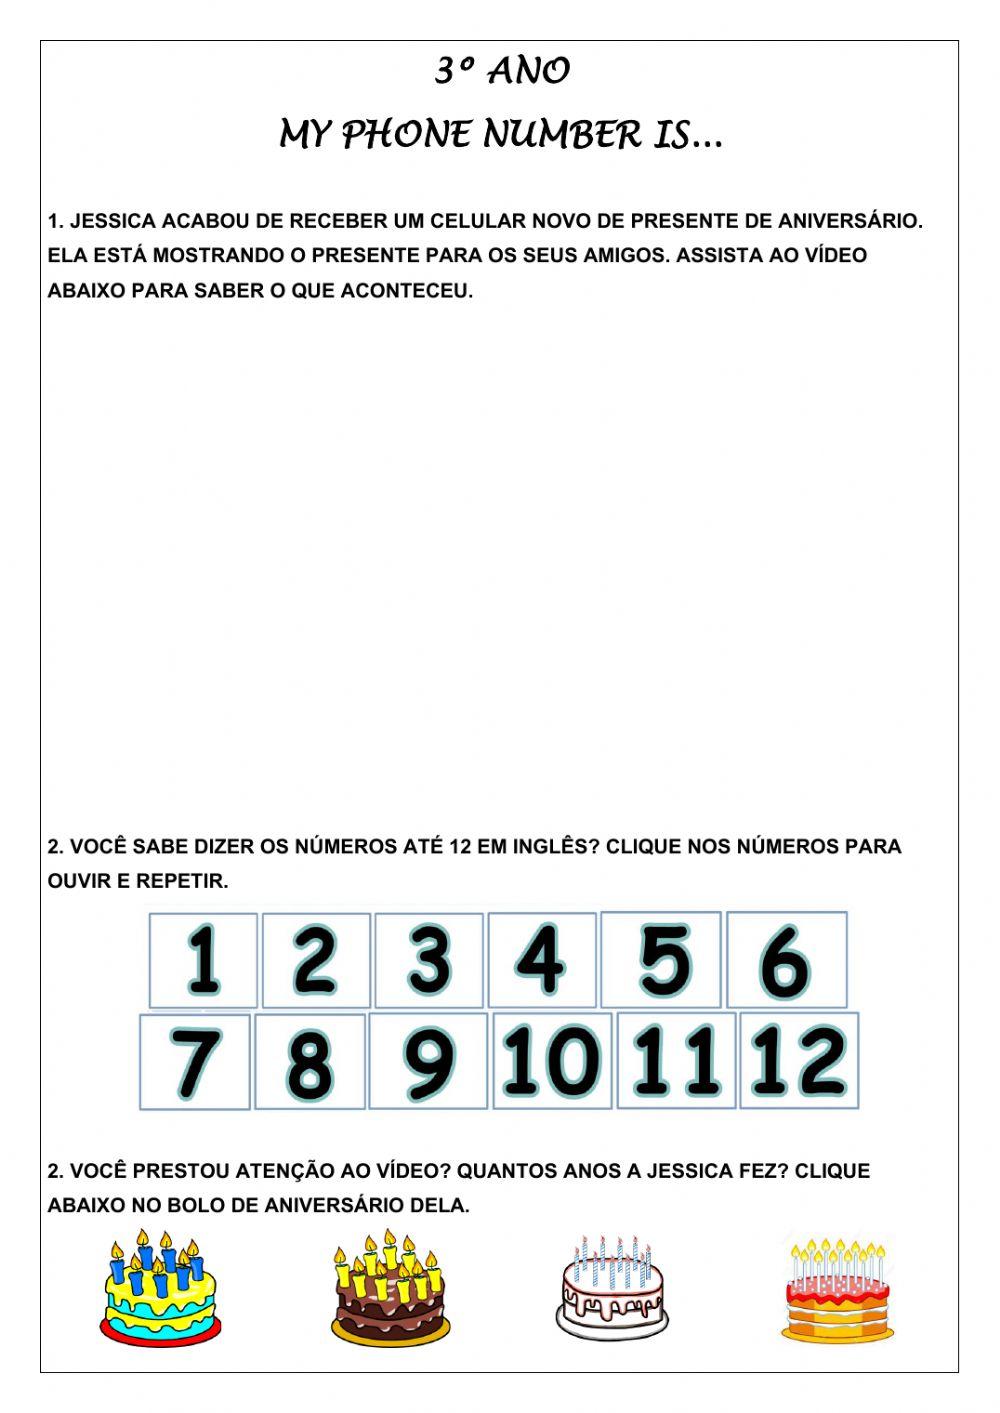 3º ano - My phone number is...